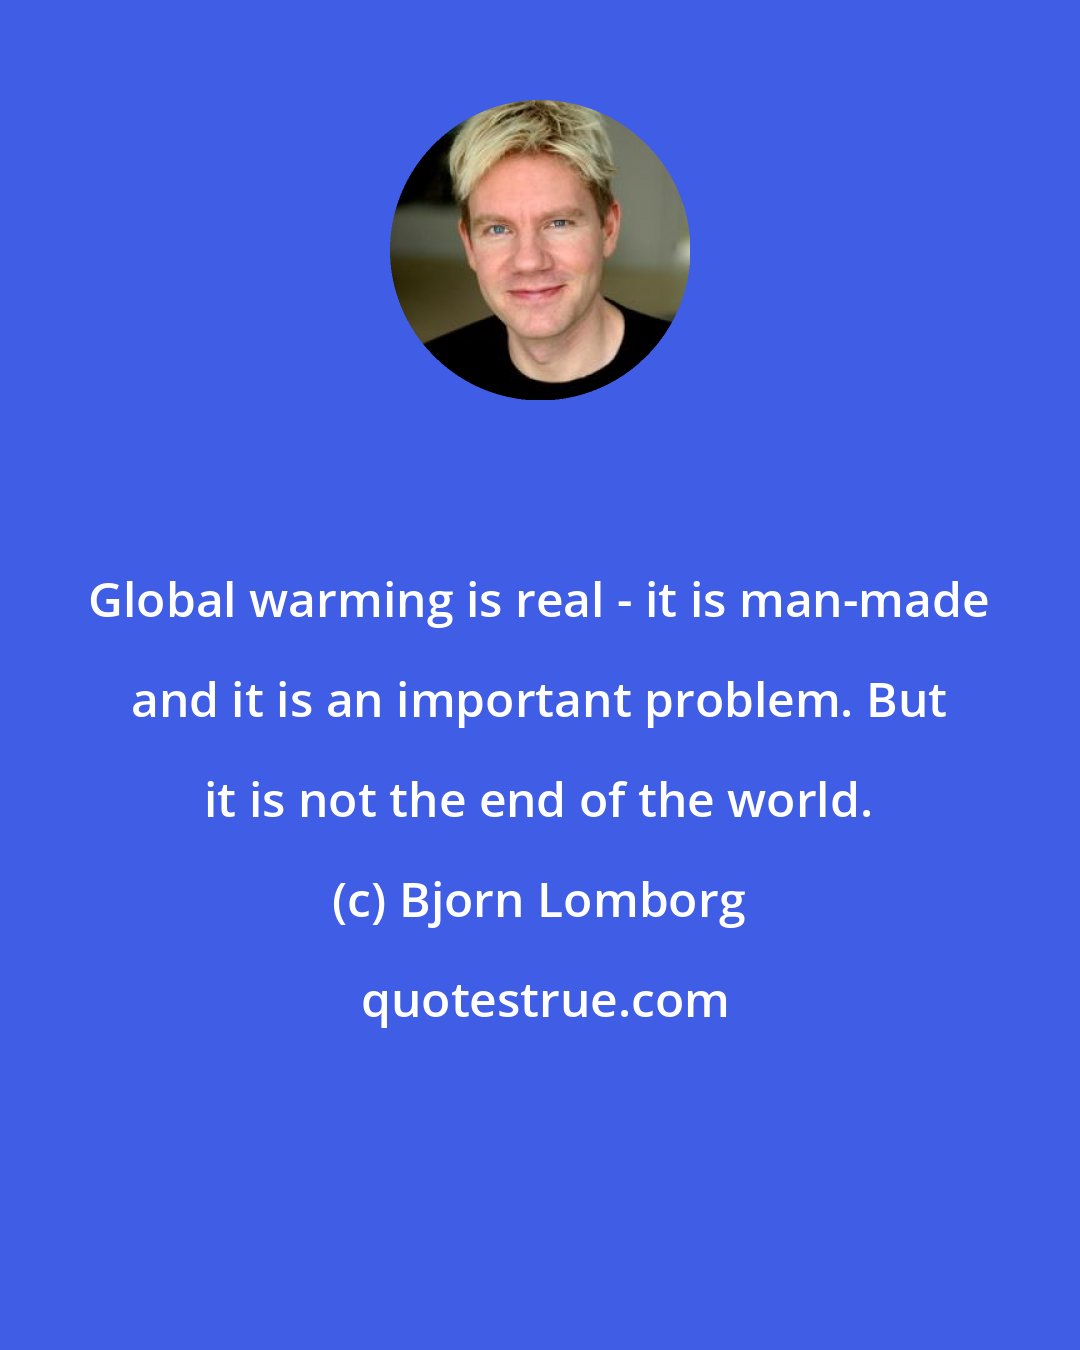 Bjorn Lomborg: Global warming is real - it is man-made and it is an important problem. But it is not the end of the world.